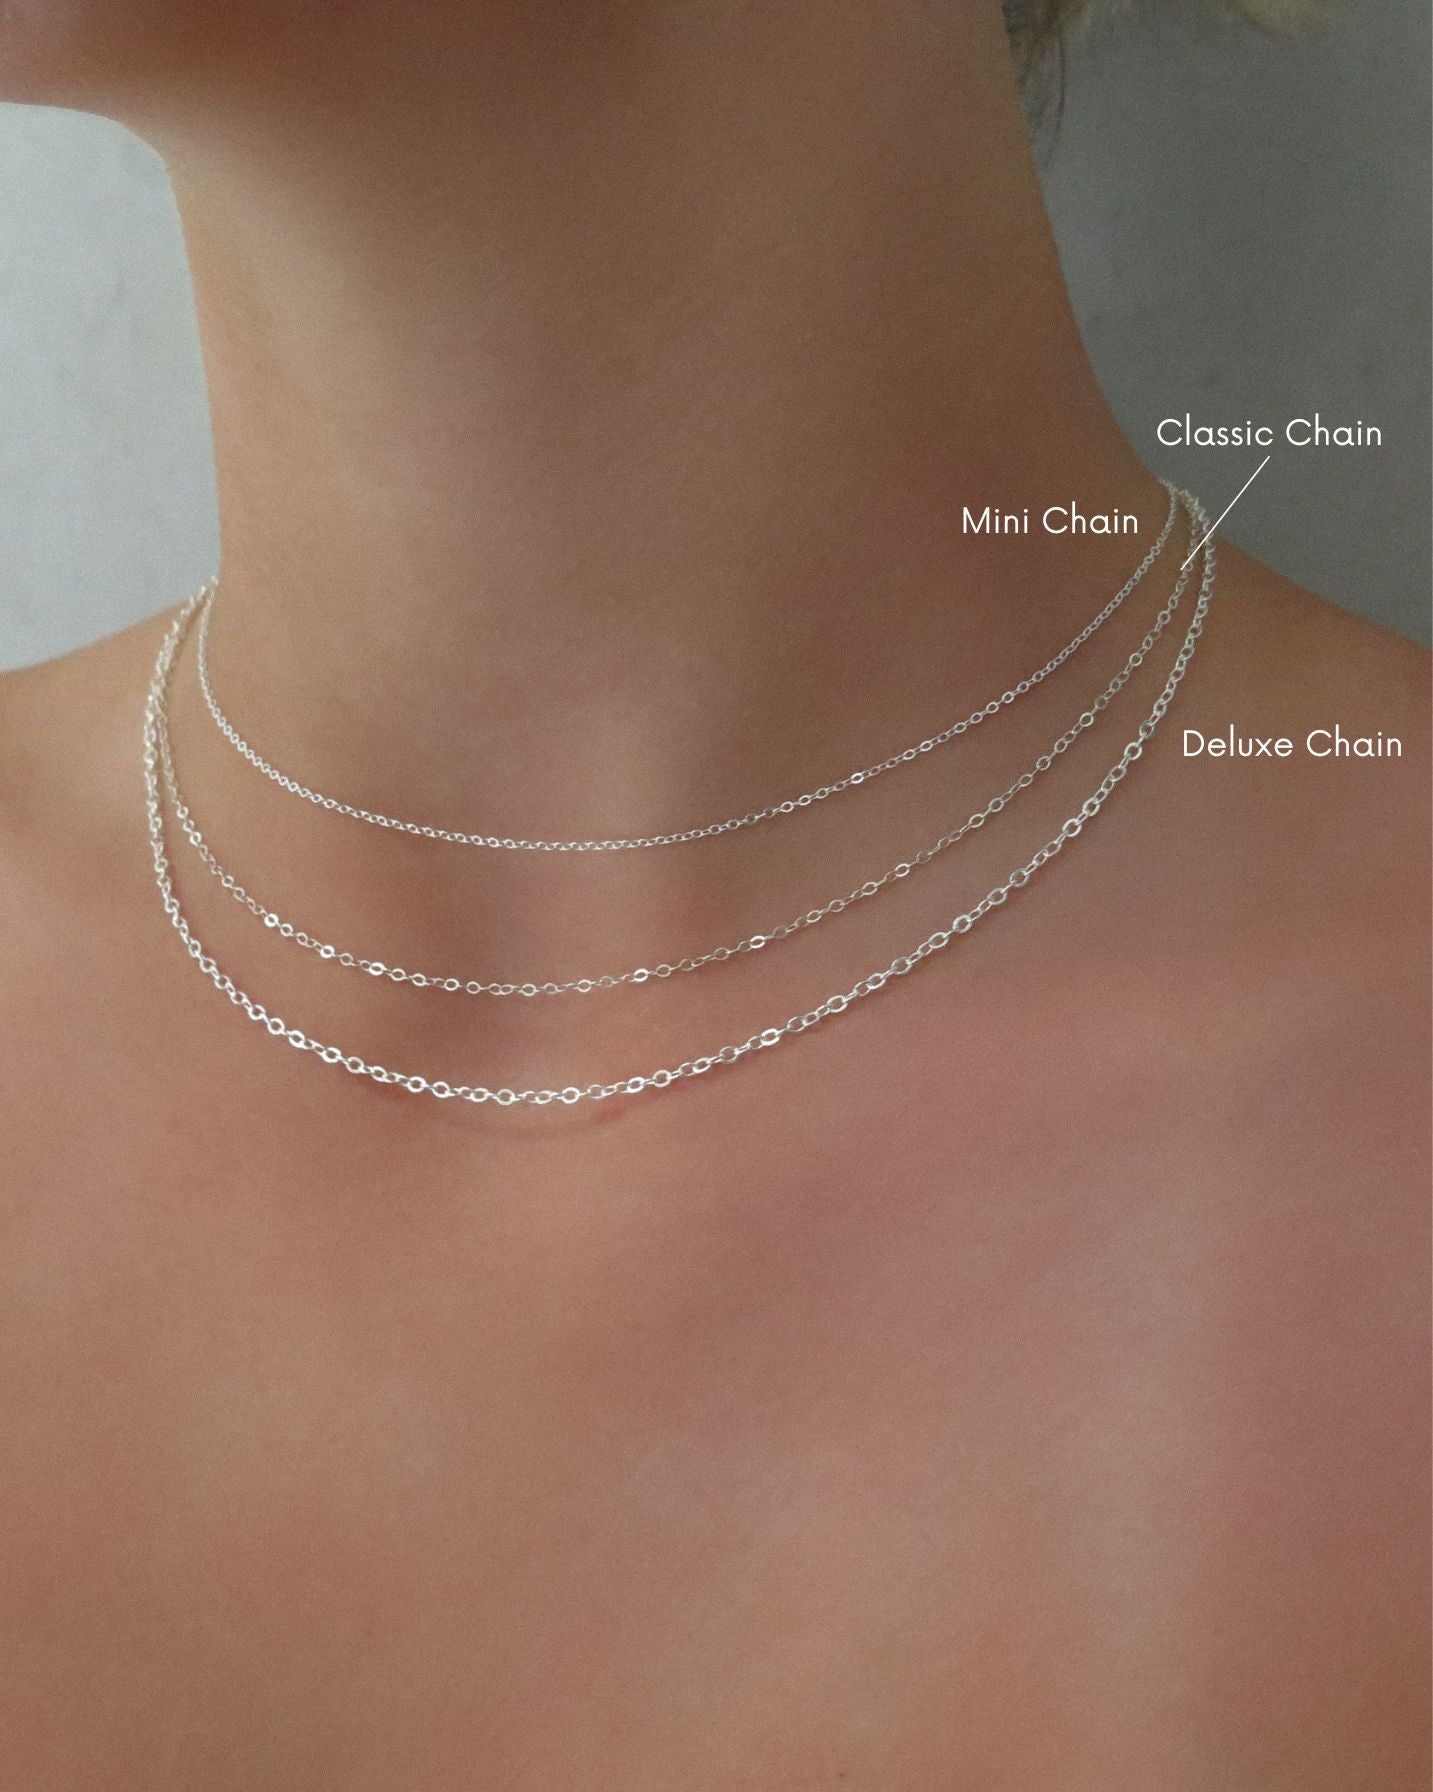 Load image into Gallery viewer, CZ Drop Necklace
